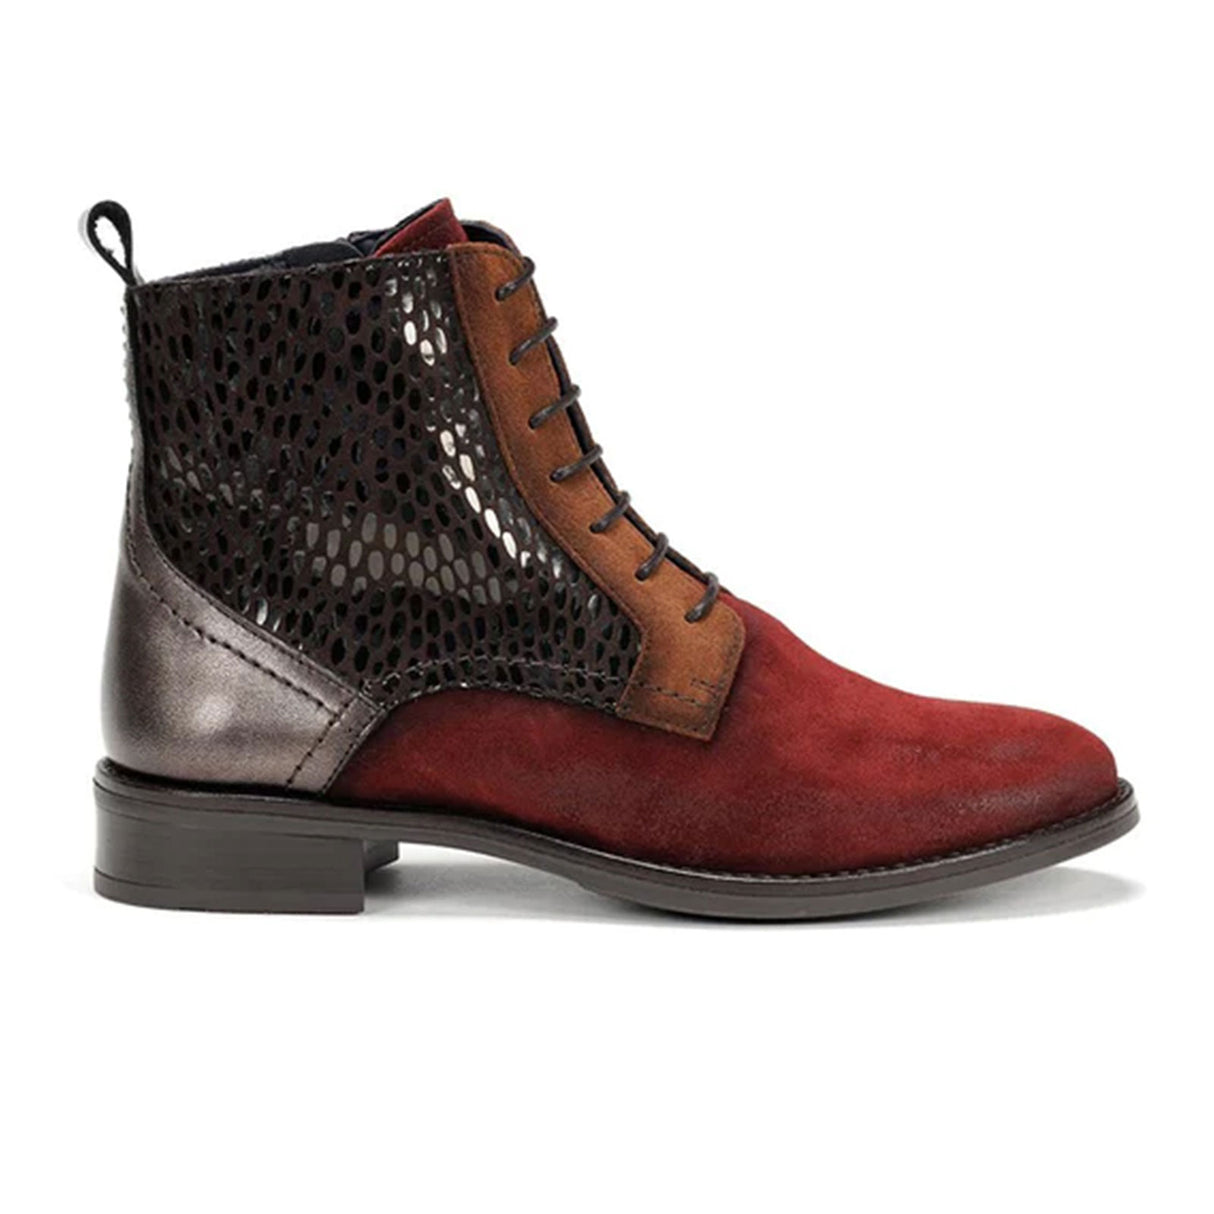 Dorking Harvard D8709 Ankle Boot (Women) - Brick Boots - Fashion - Ankle Boot - The Heel Shoe Fitters